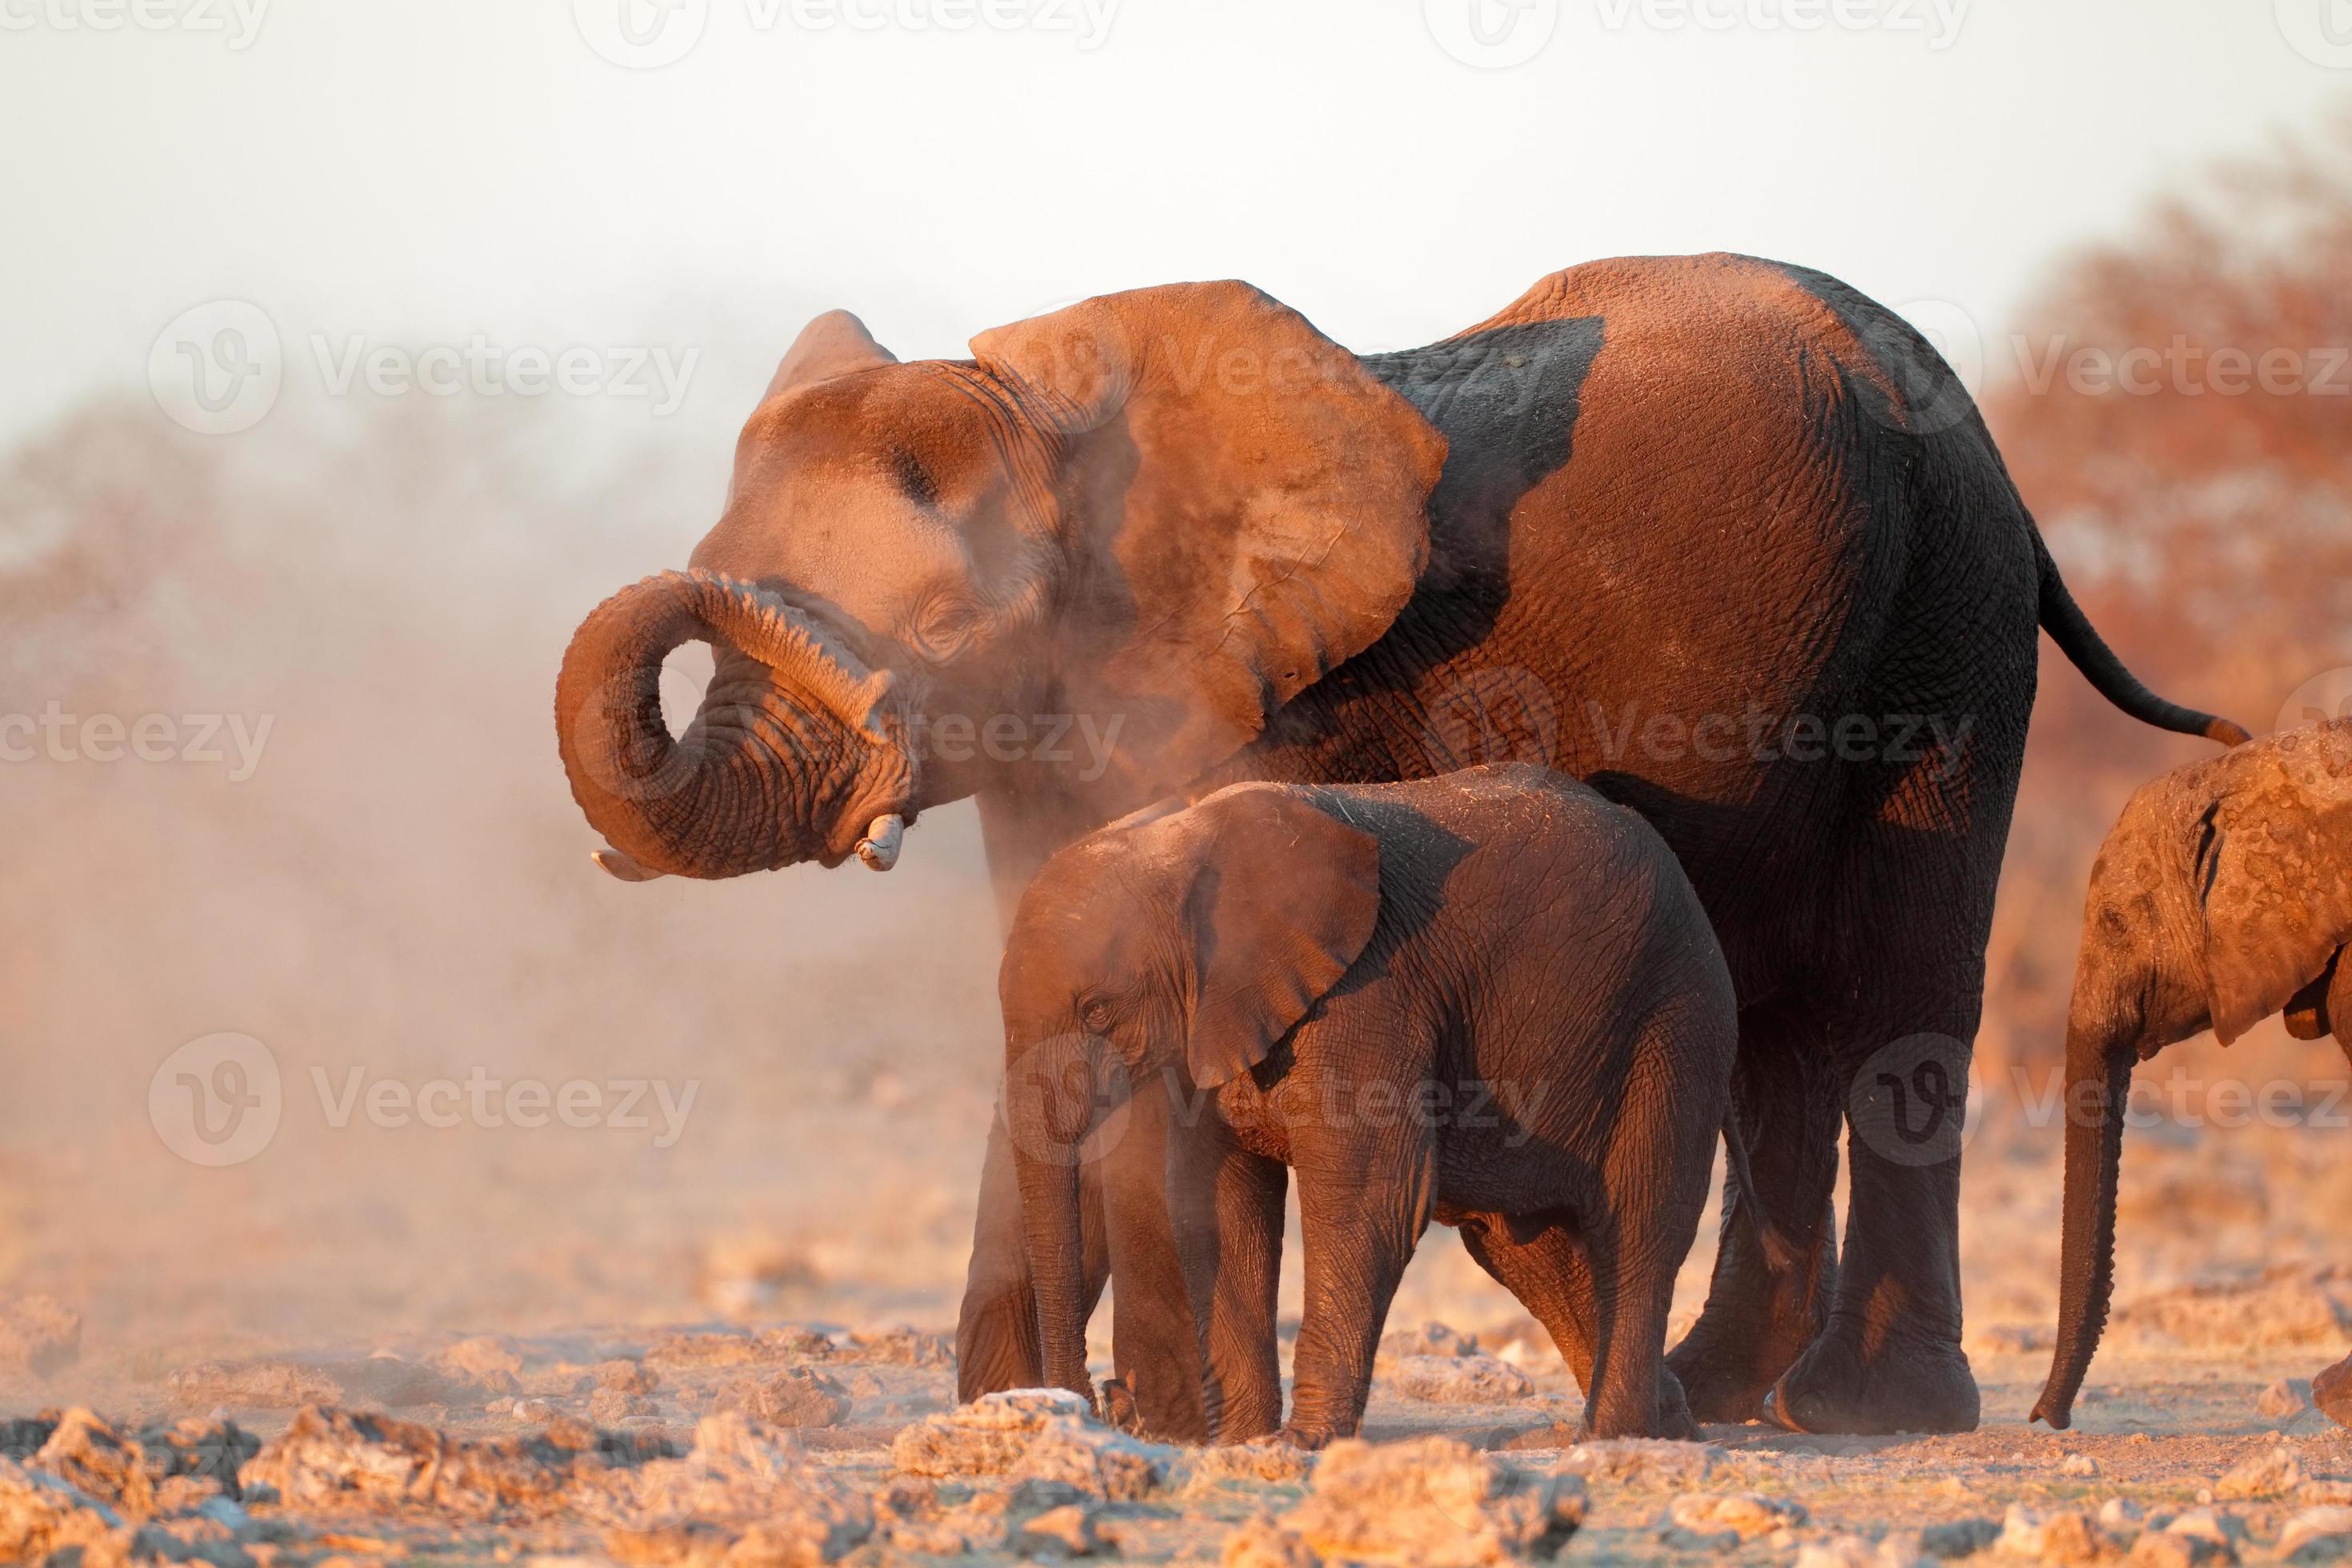 African elephants covered in dust photo